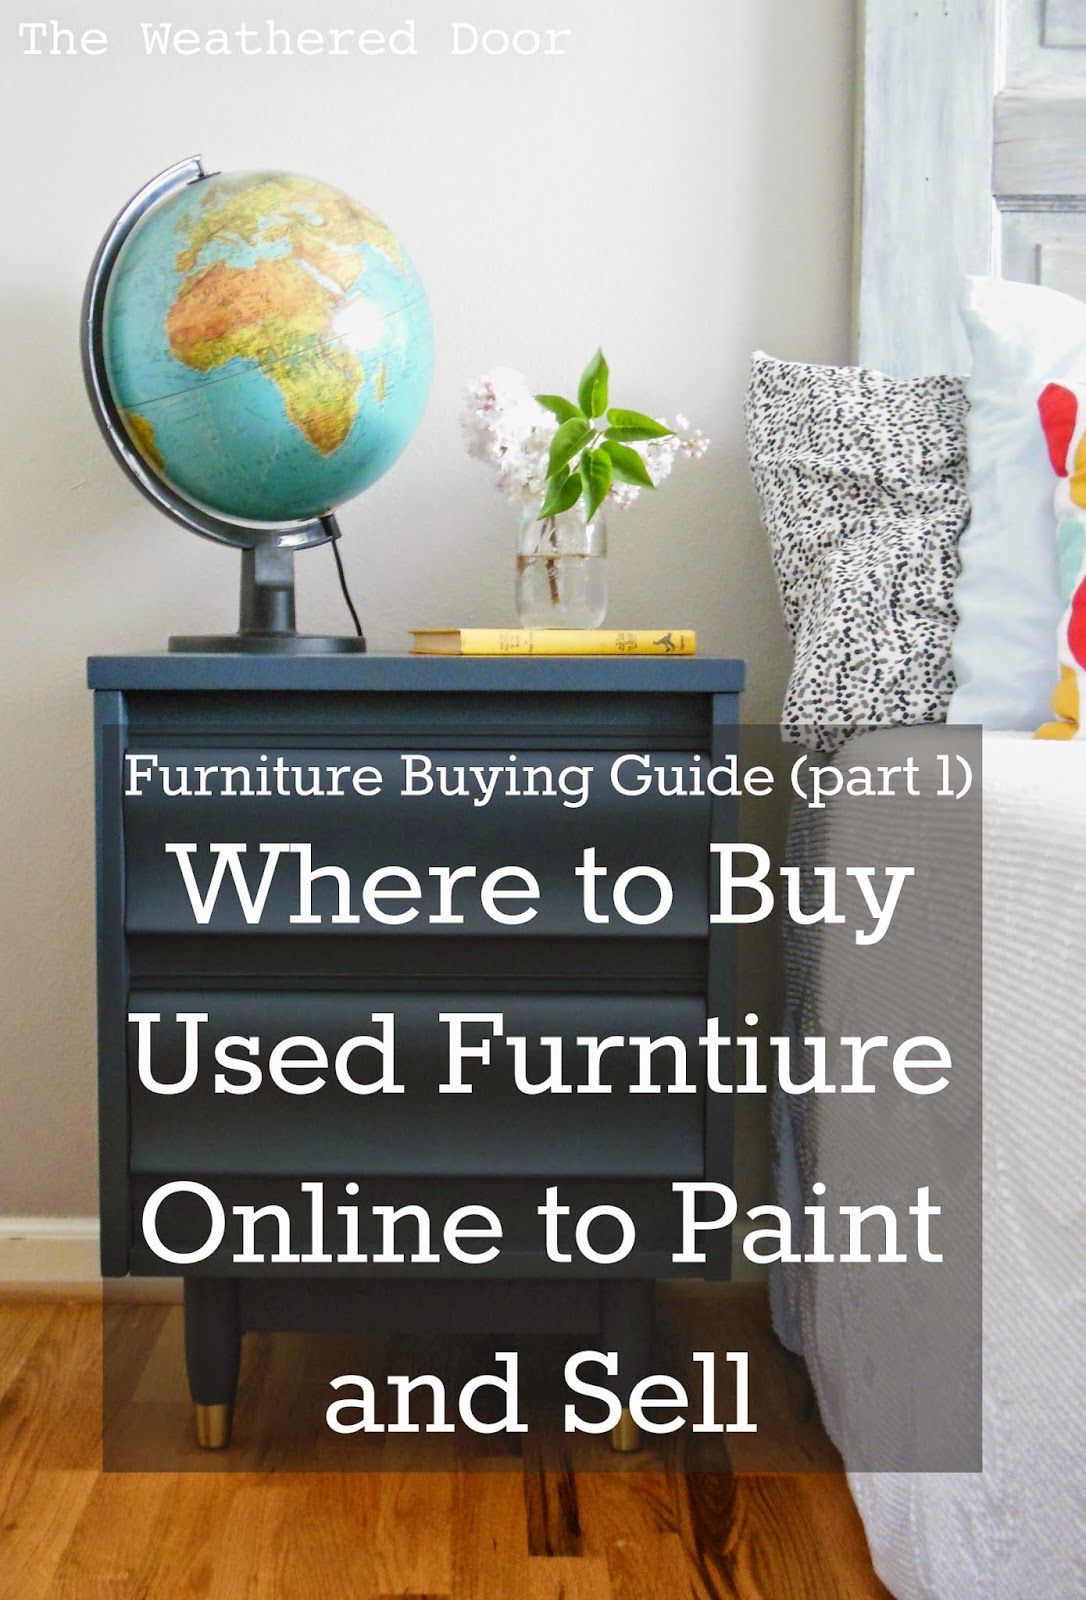 Furniture Buying Guide: Where to Look for and Buy Used Furniture Pieces Online to Paint and Sell ...